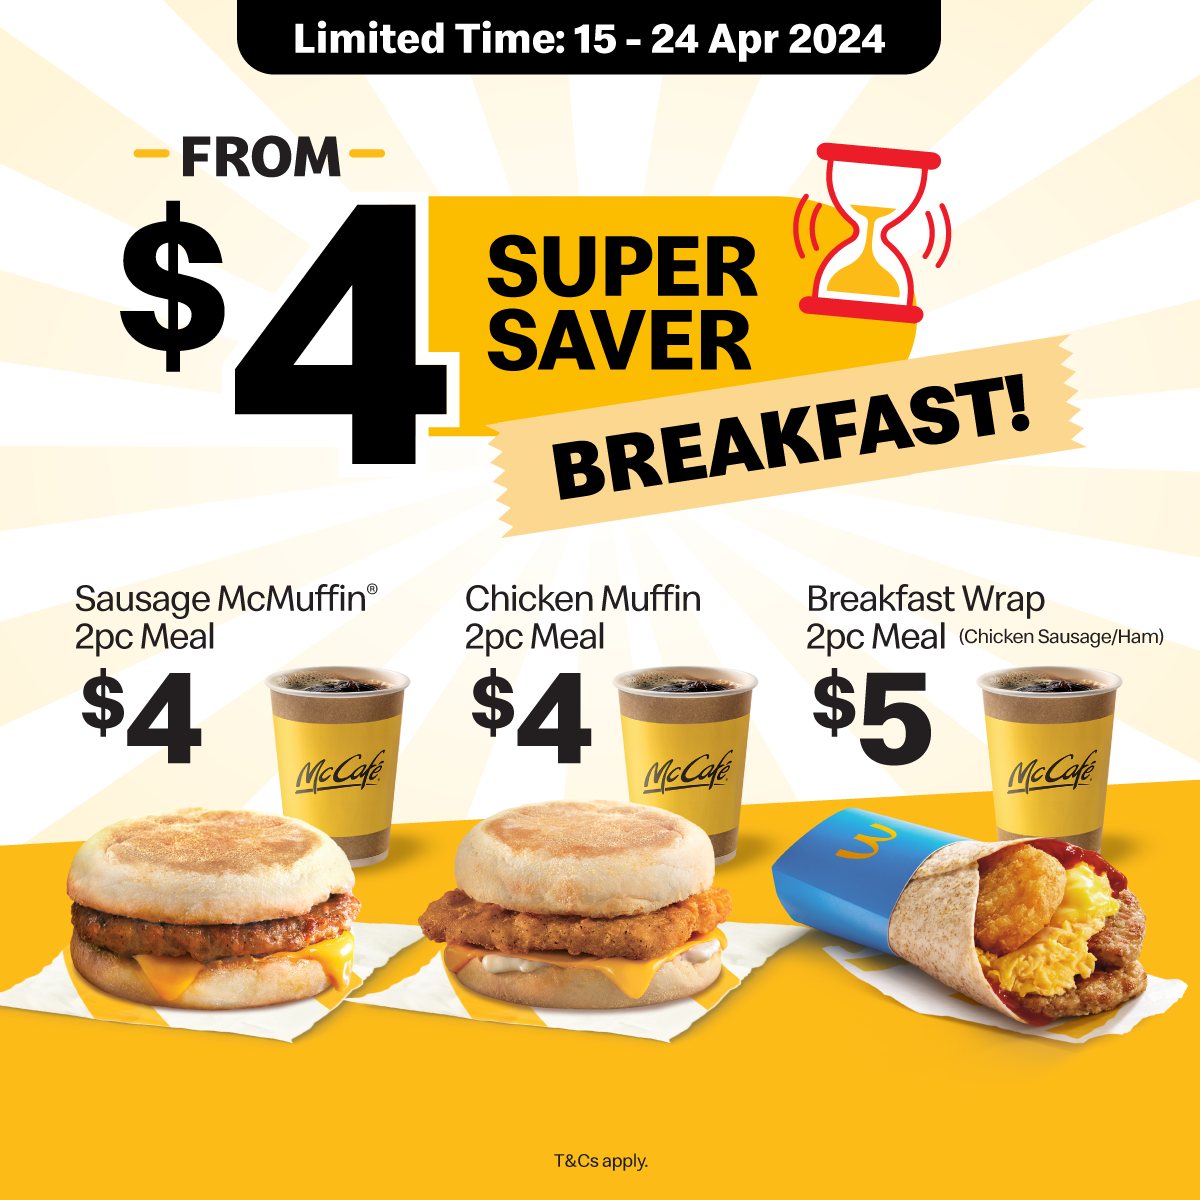 Lobang: McDonald's launches limited-time Super Saver Breakfast deals starting at $4, available from Apr 15 to Apr 24, 2024 - 3